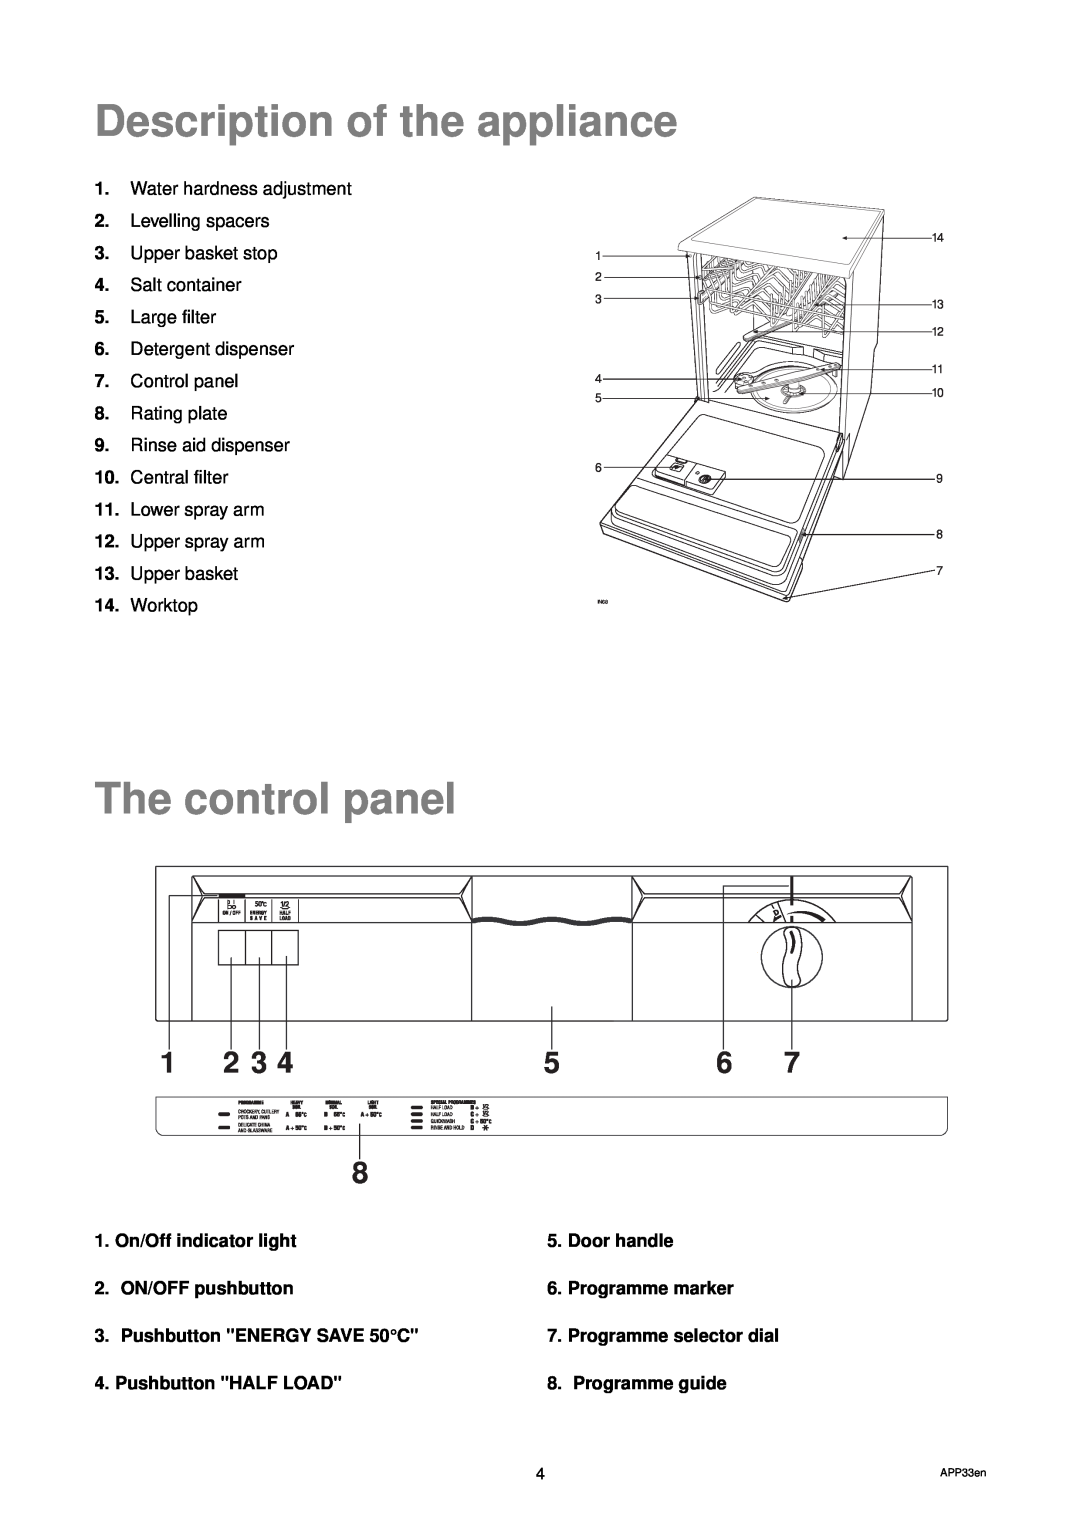 Zanussi DWS 935 Description of the appliance, The control panel, On/Off indicator light, Door handle, ON/OFF pushbutton 